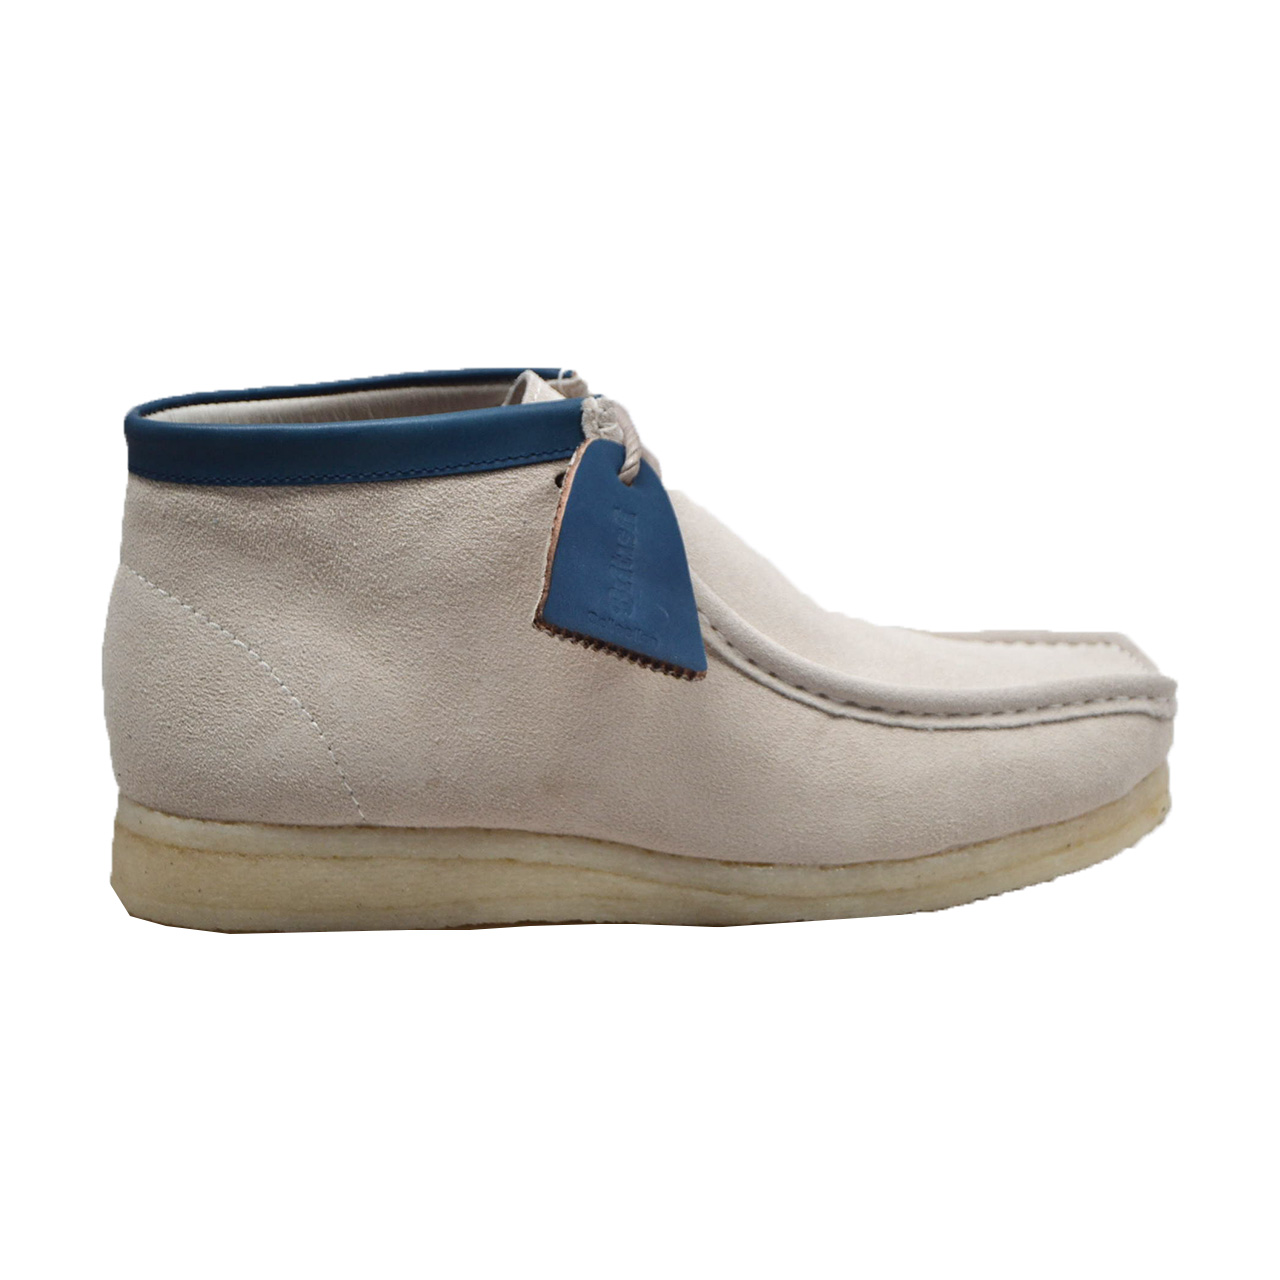 British Collection Walkers-Bone Suede and Leather [100200-2] - $180.00 ...